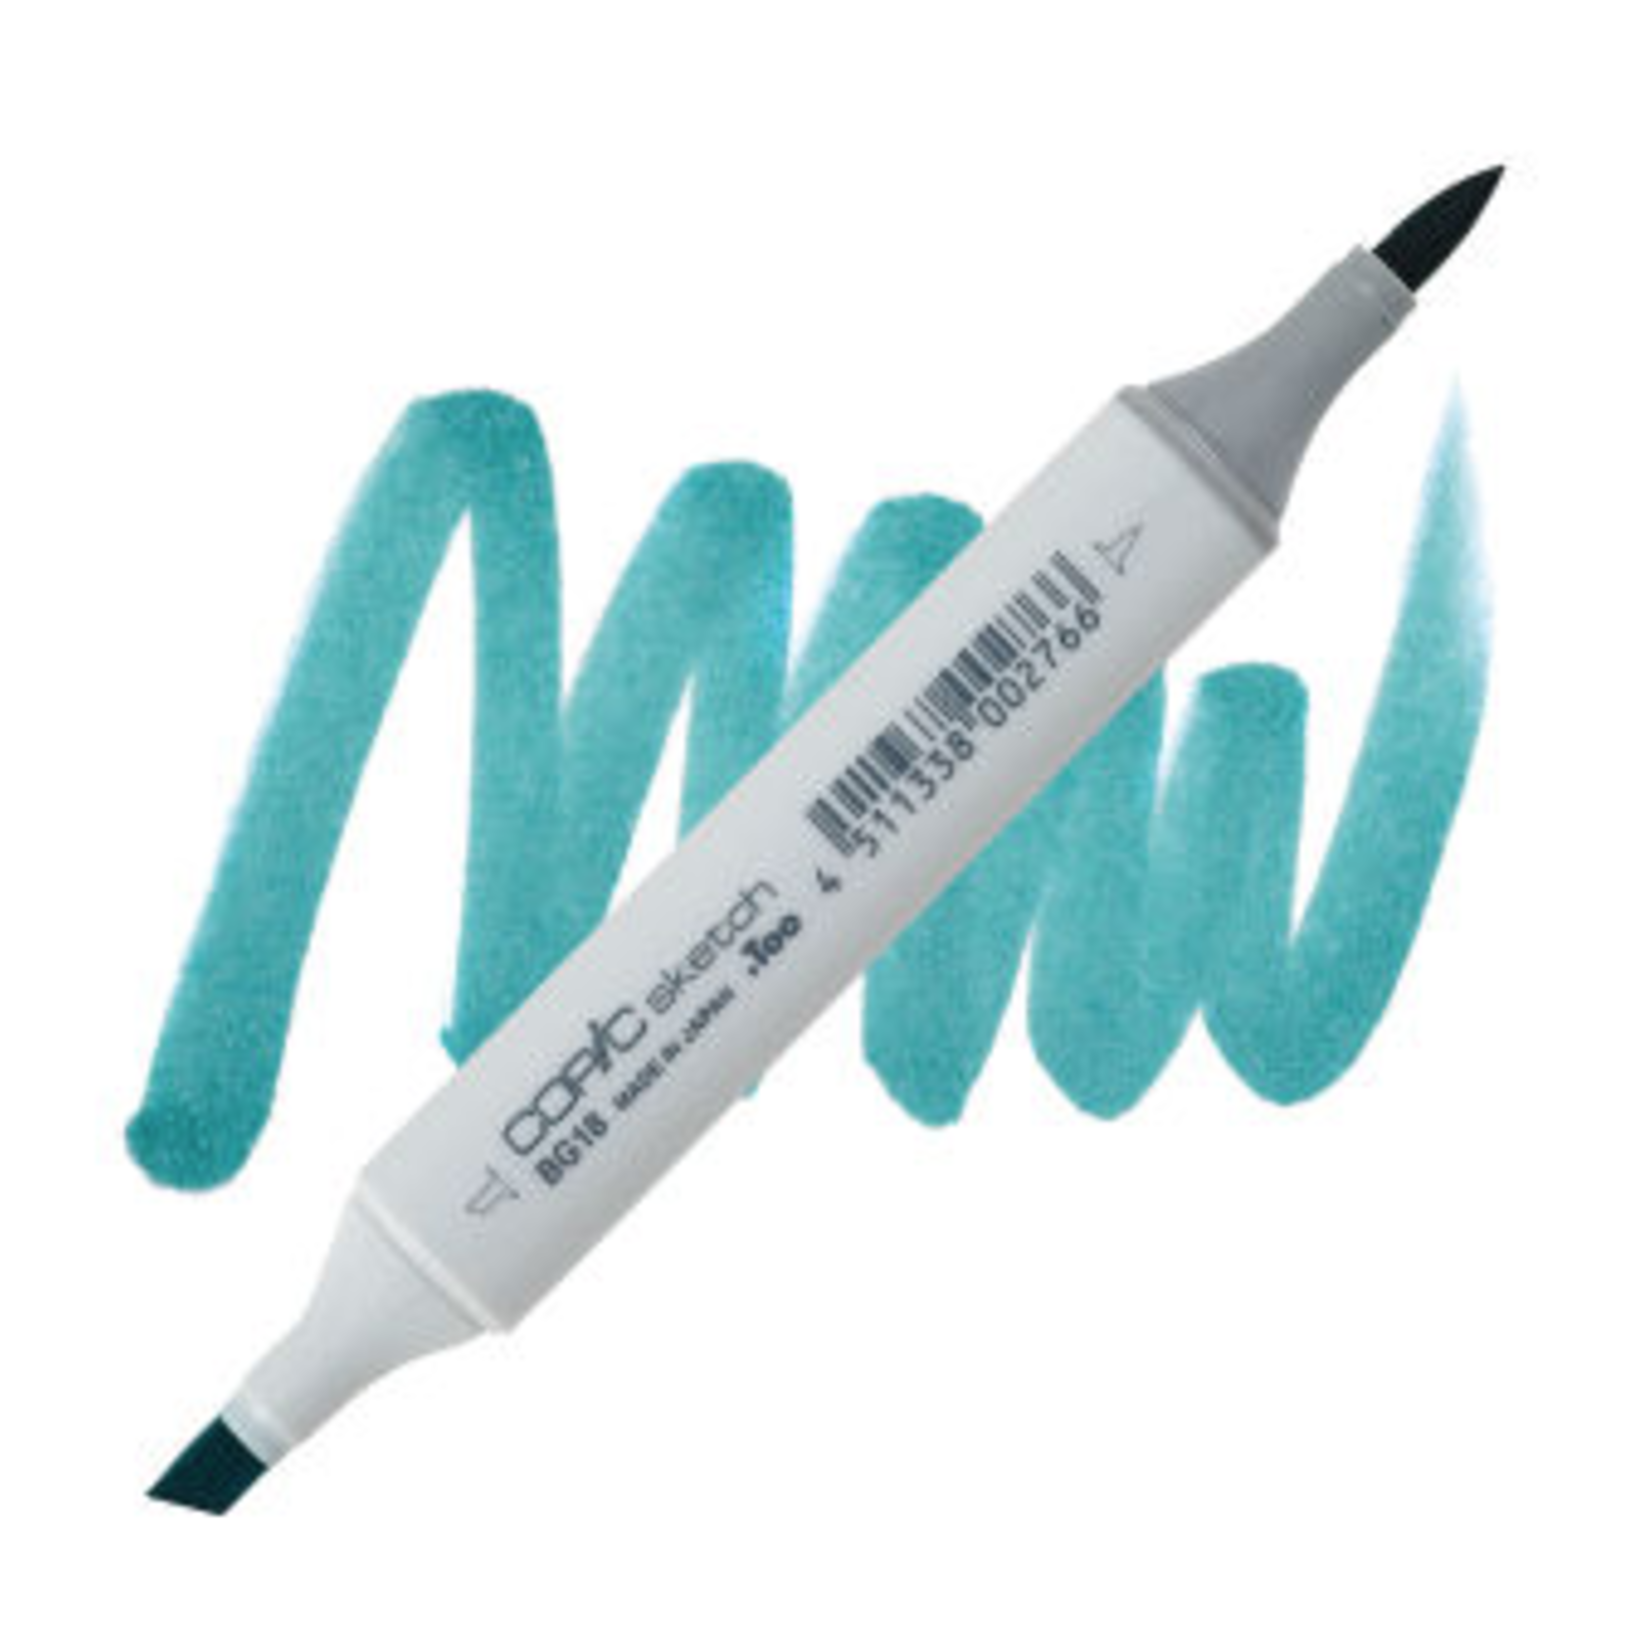 Copic Copic Marker Bg18 - Teal Blue